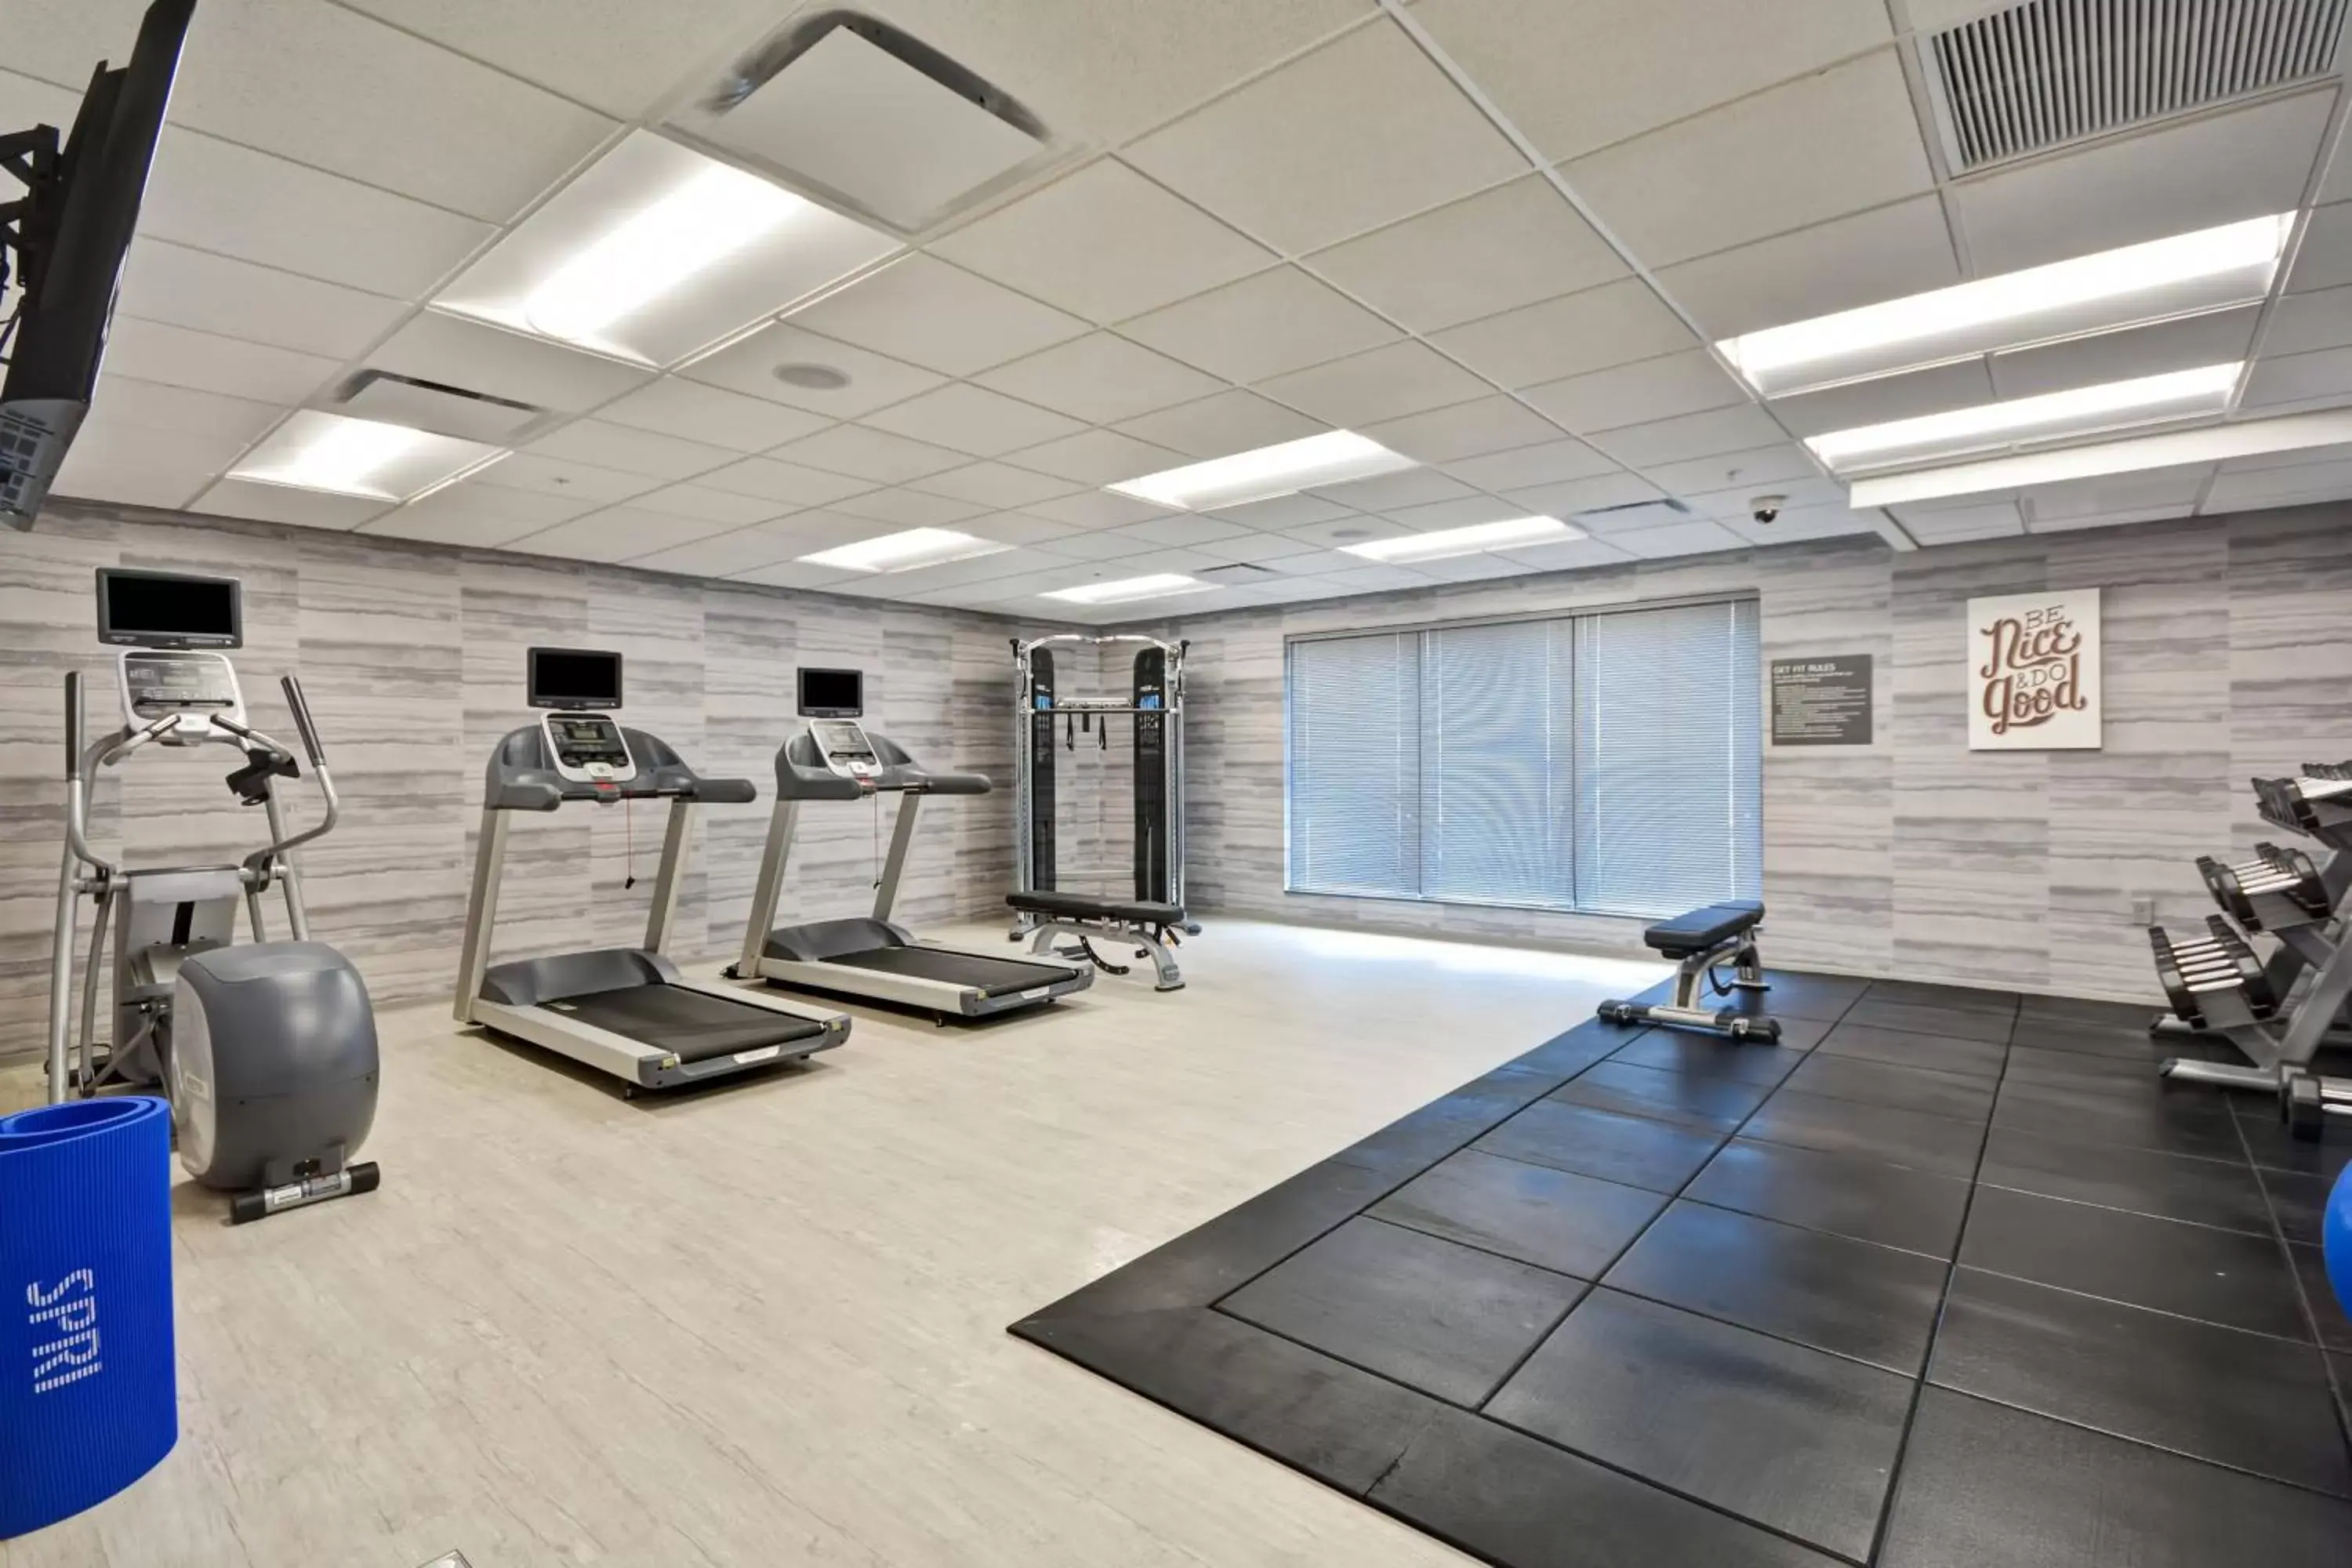 Fitness centre/facilities, Fitness Center/Facilities in TownePlace Suites by Marriott Cranbury South Brunswick